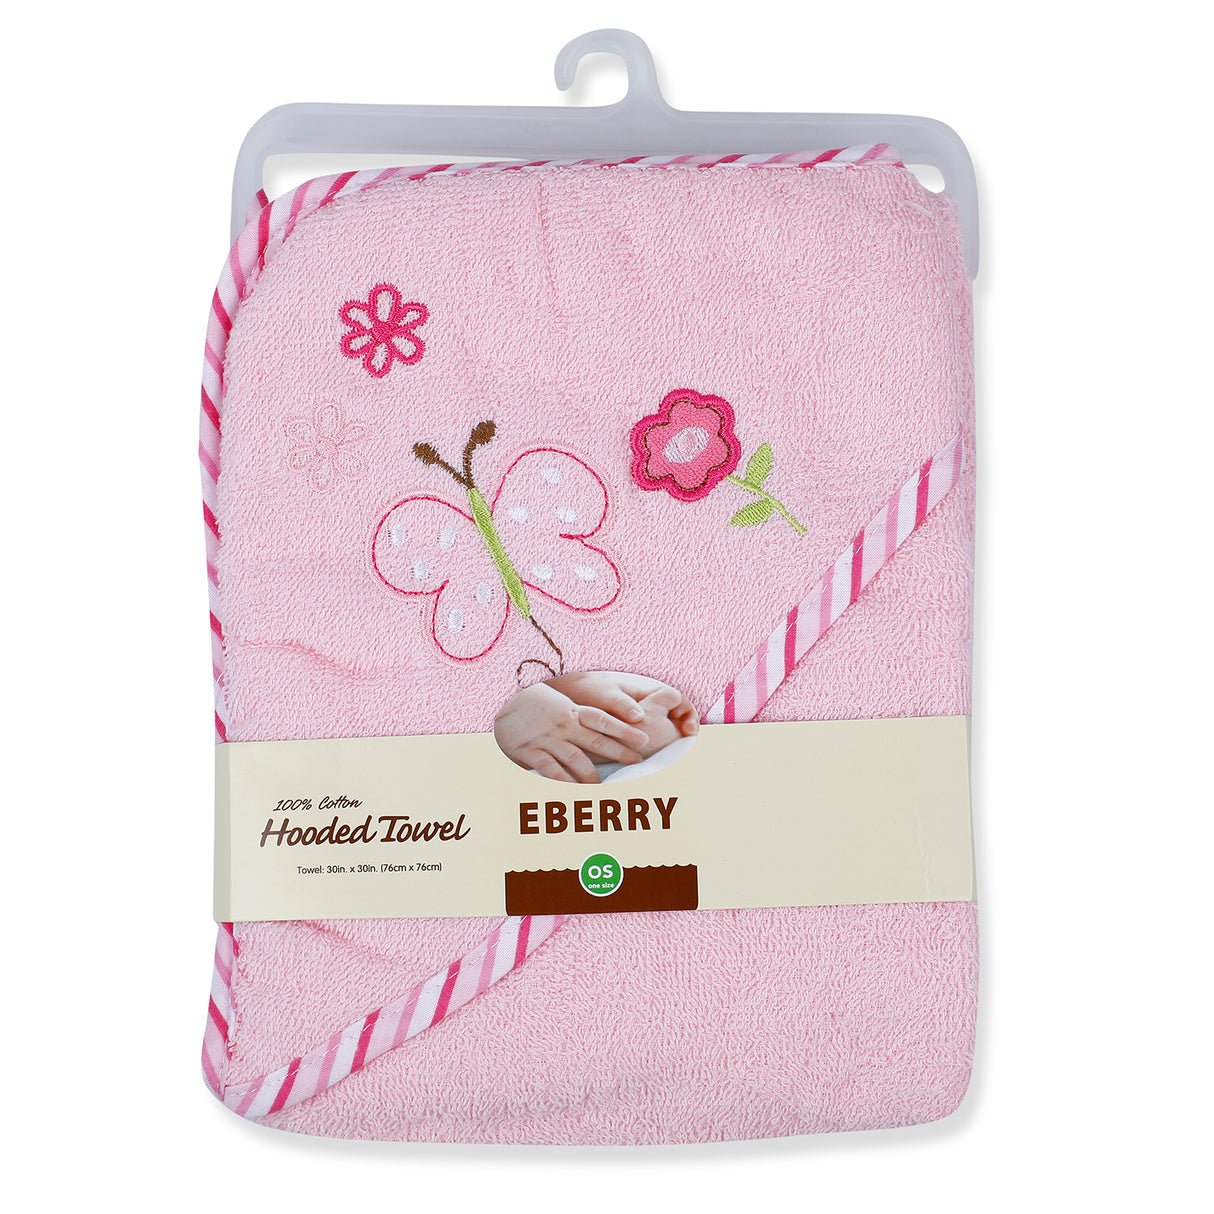 EBERRY Extra Soft Hooded Towel